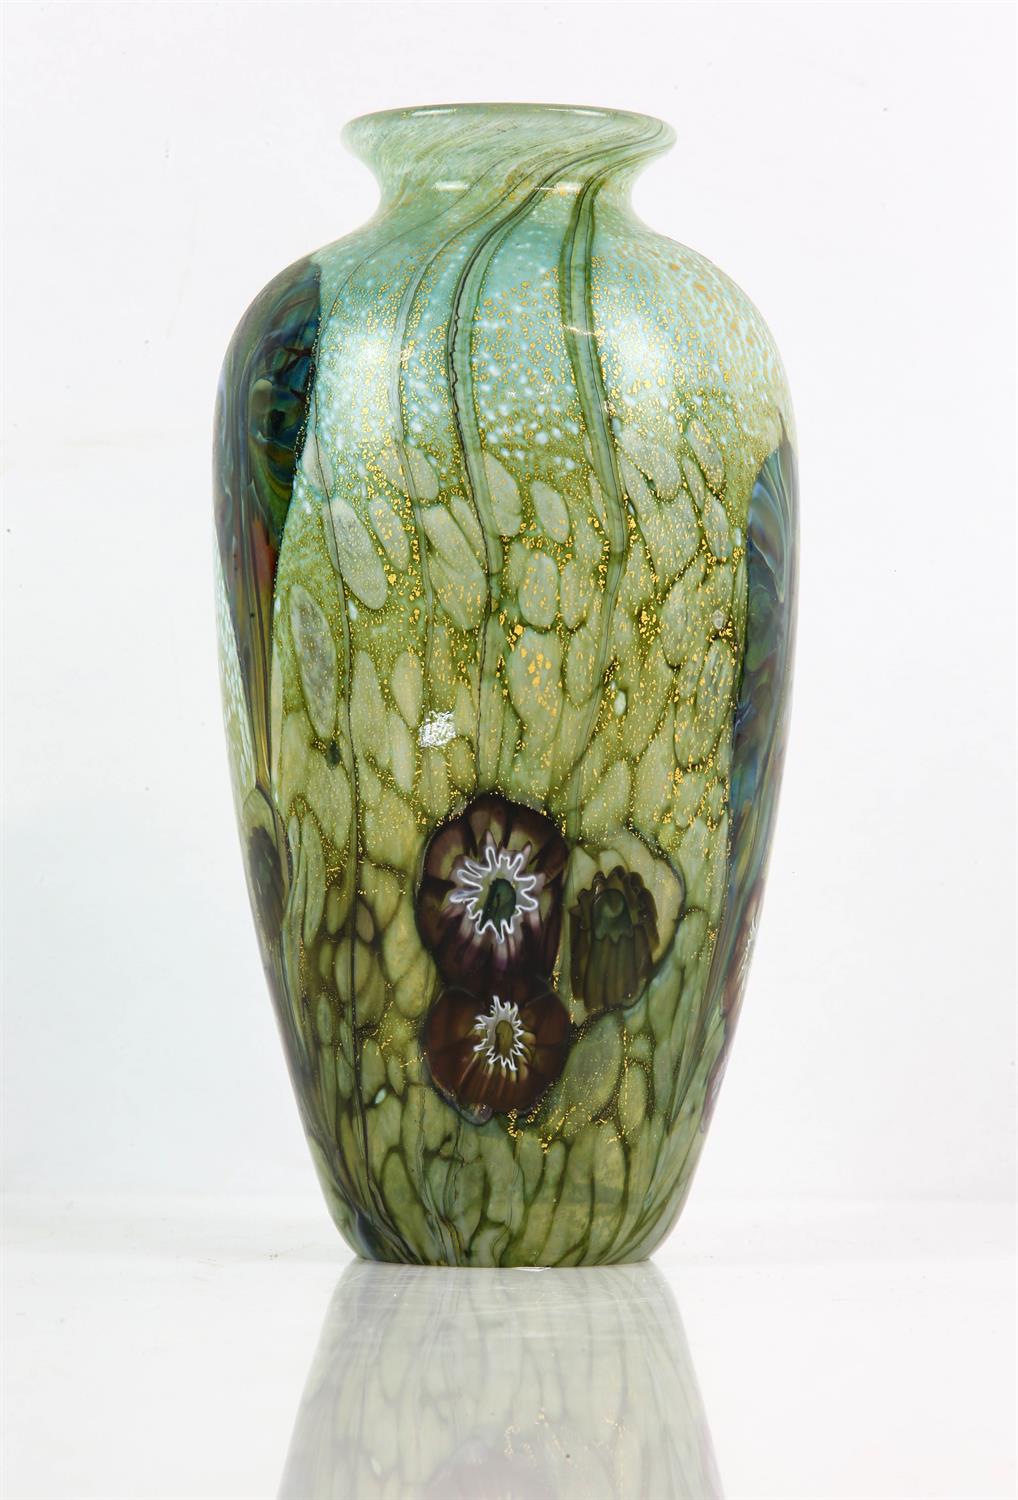 JONATHAN HARRIS FOR IRONBRIDGE GLASS, vase, with cane flowers and leaves, signed and inscribed - Image 2 of 5